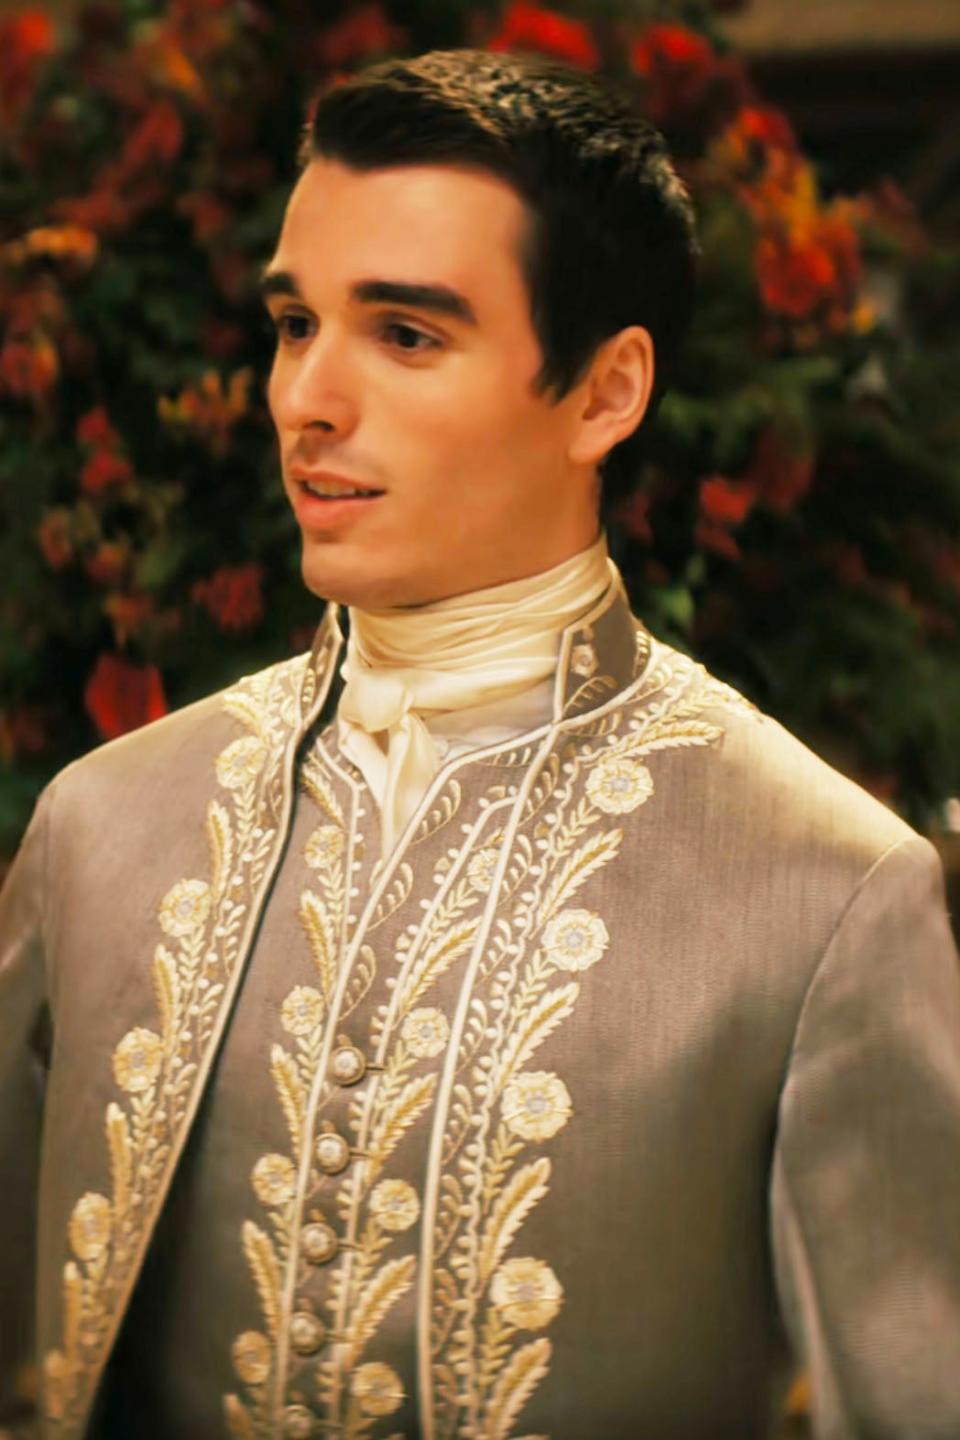 Corey Mylchreest, as King George, in a coat with intricate embroidered detailing